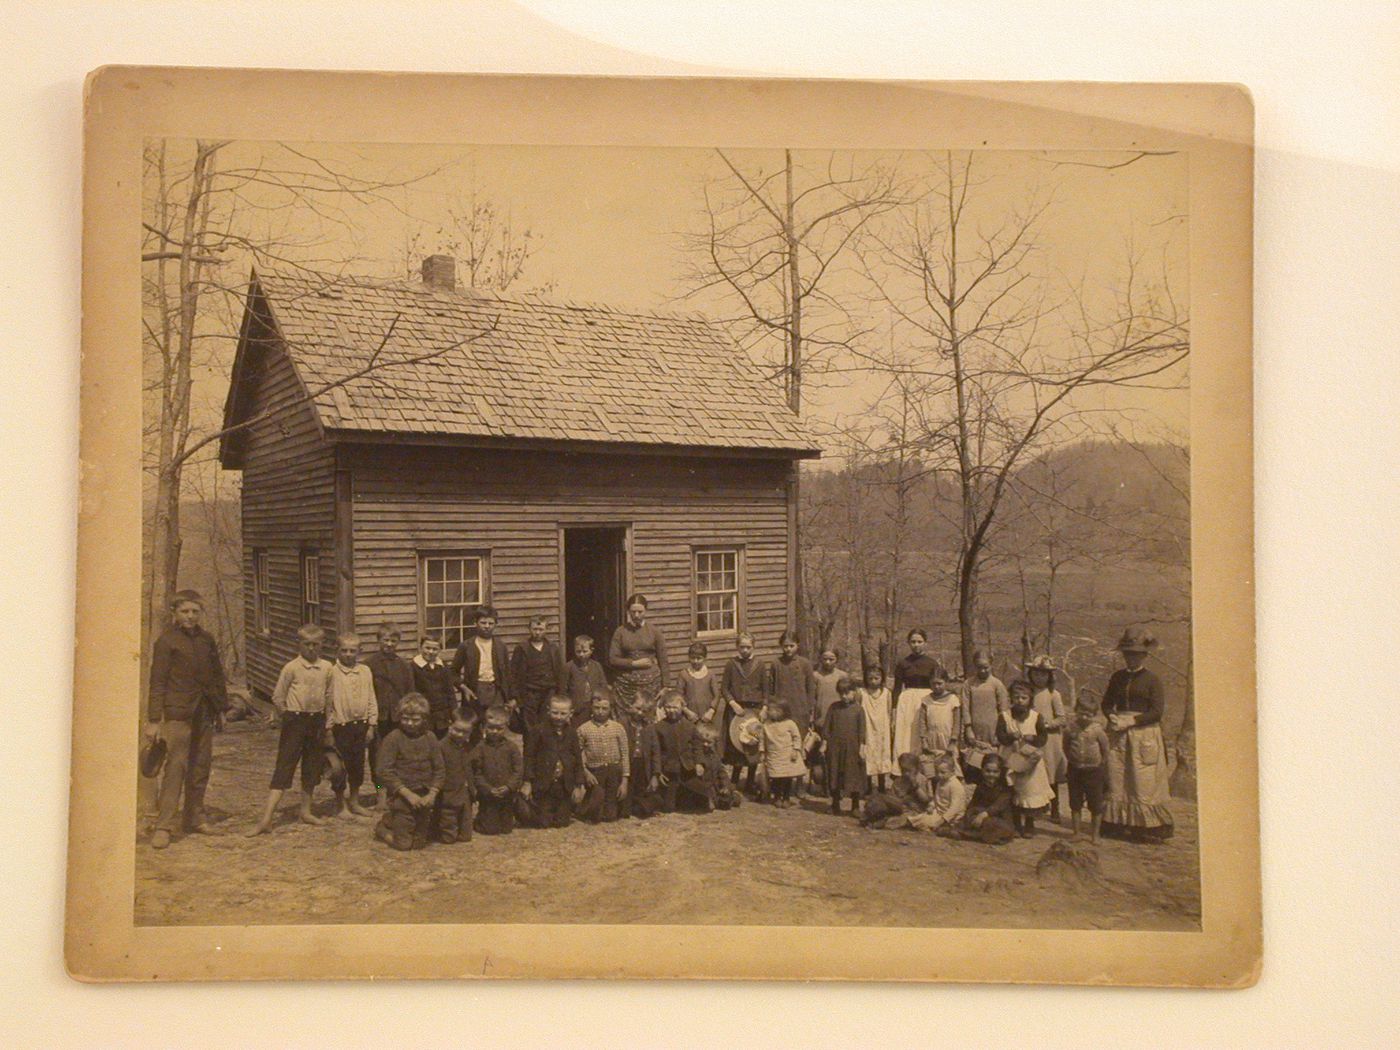 Wooden schoolhouse with students in yard